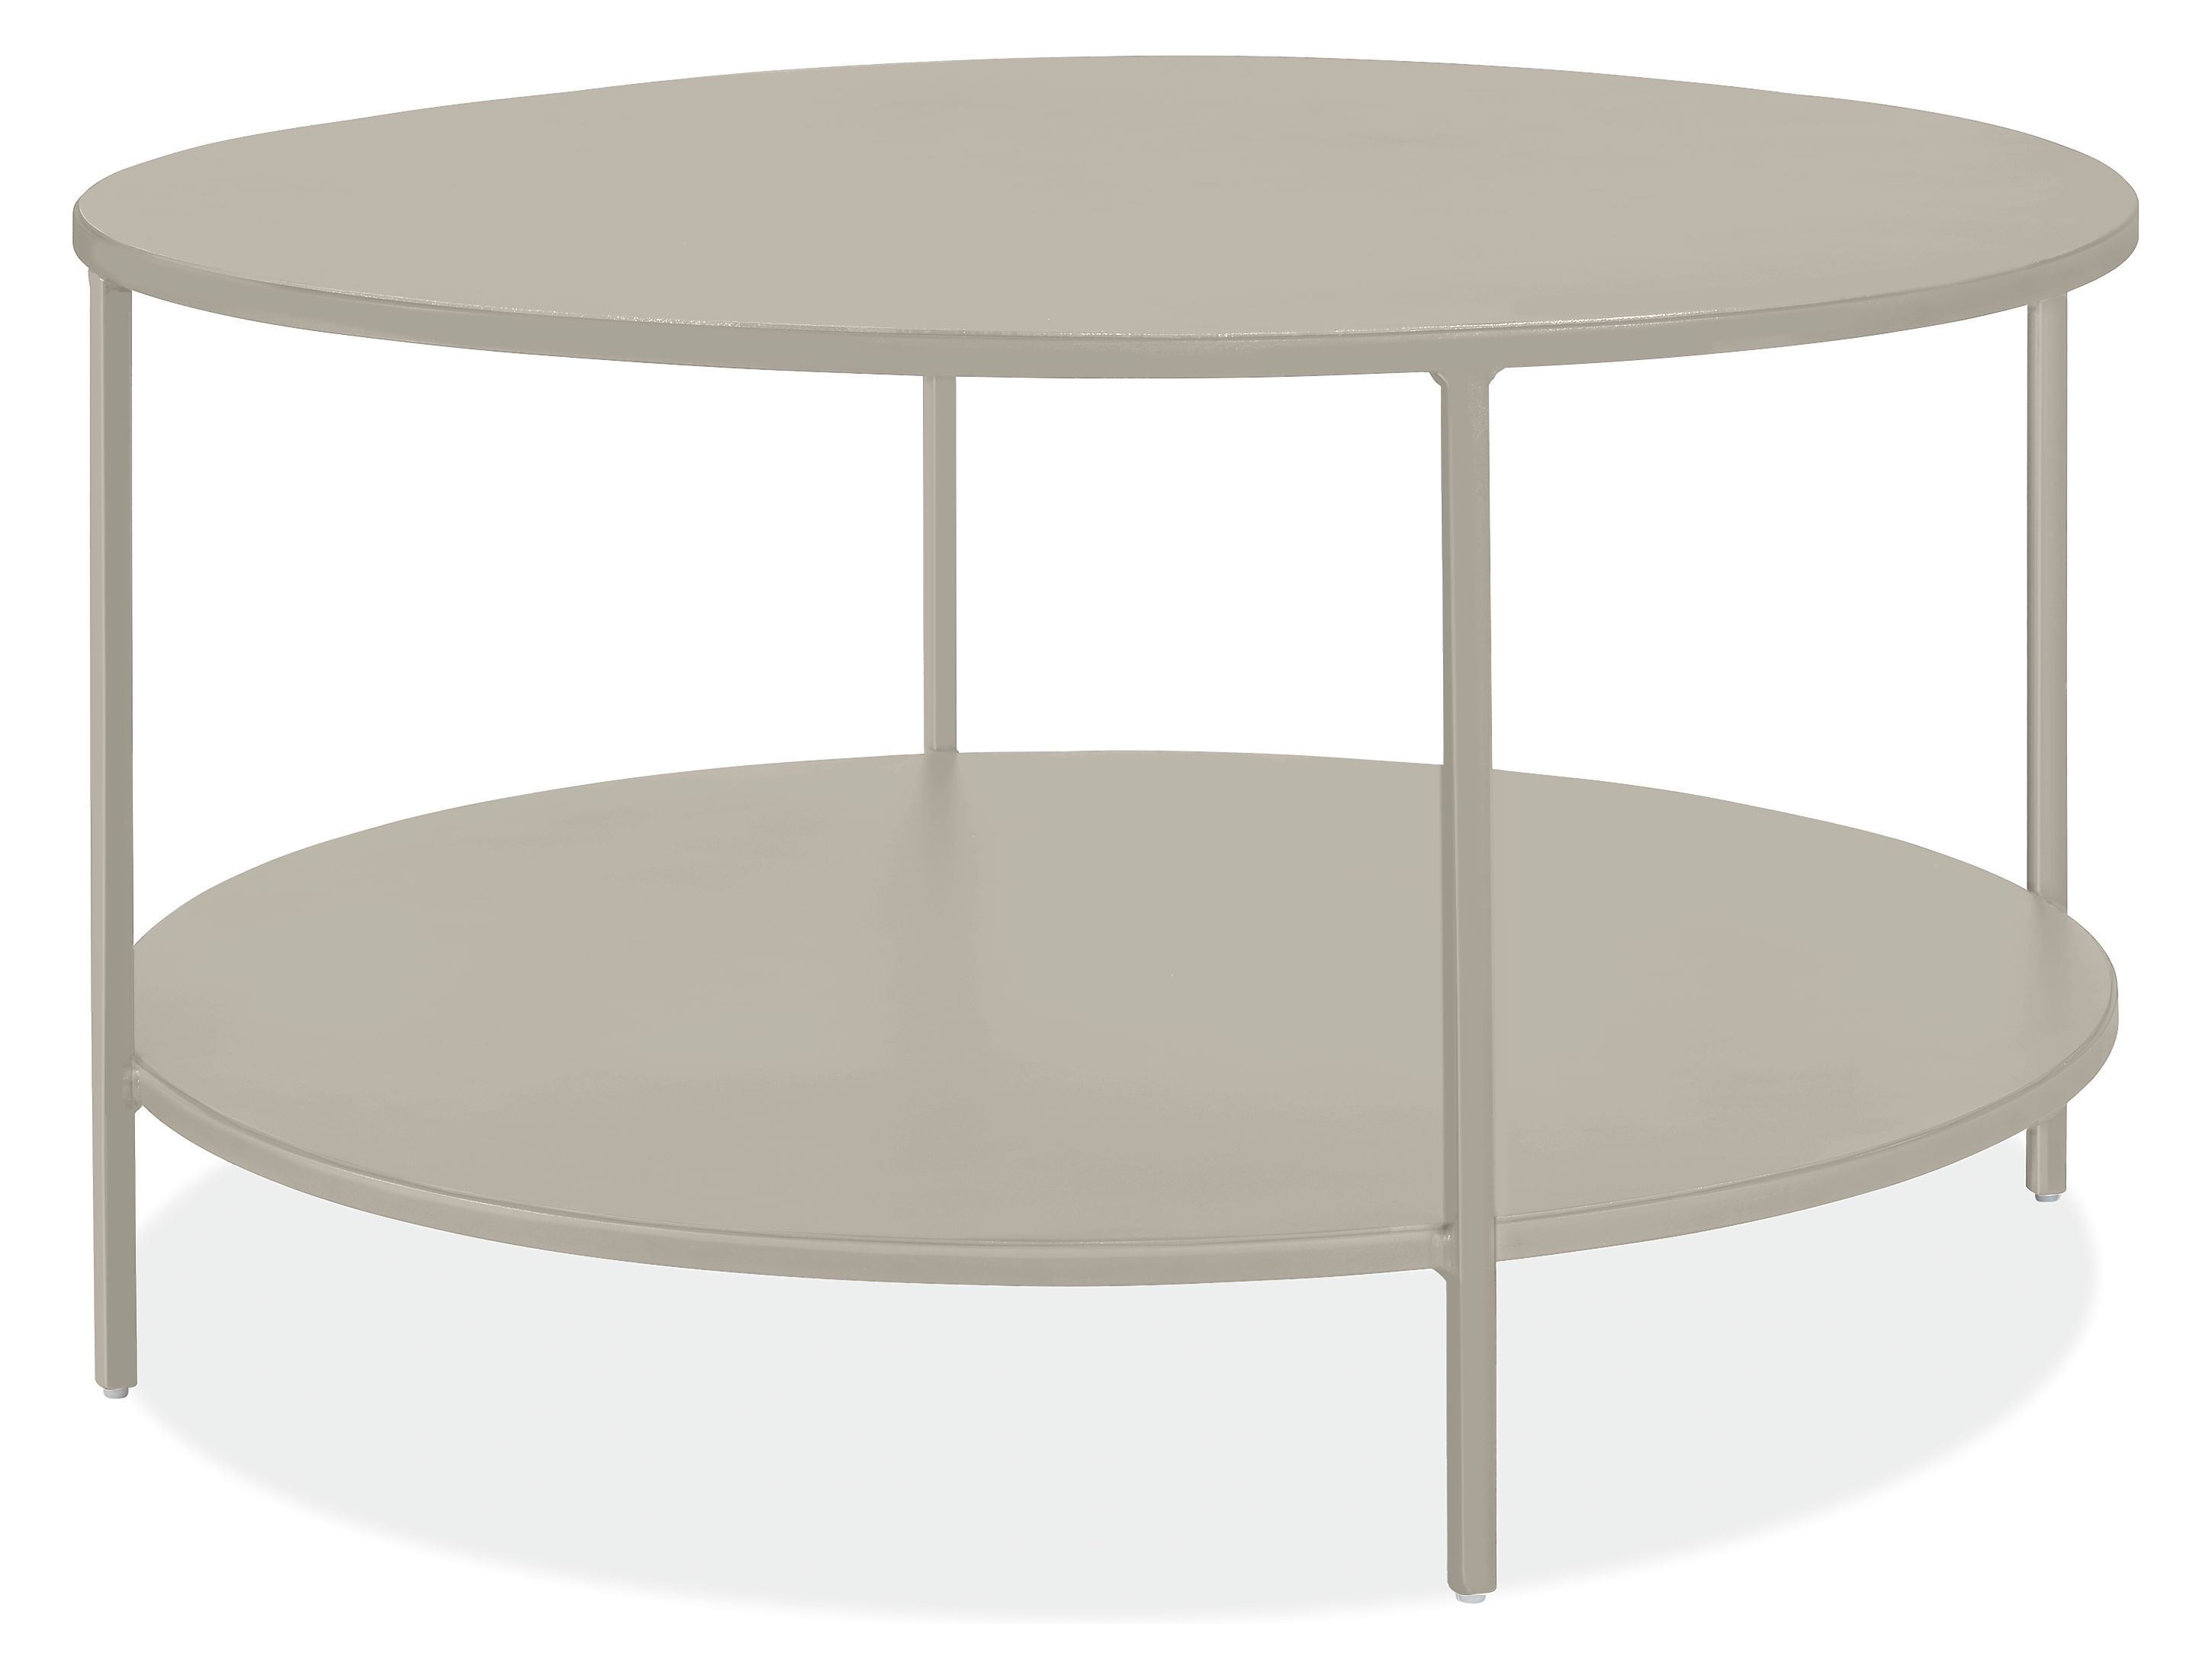 Slim Round Coffee Tables In Colors Modern Coffee Tables Modern Living Room Furniture Room Board